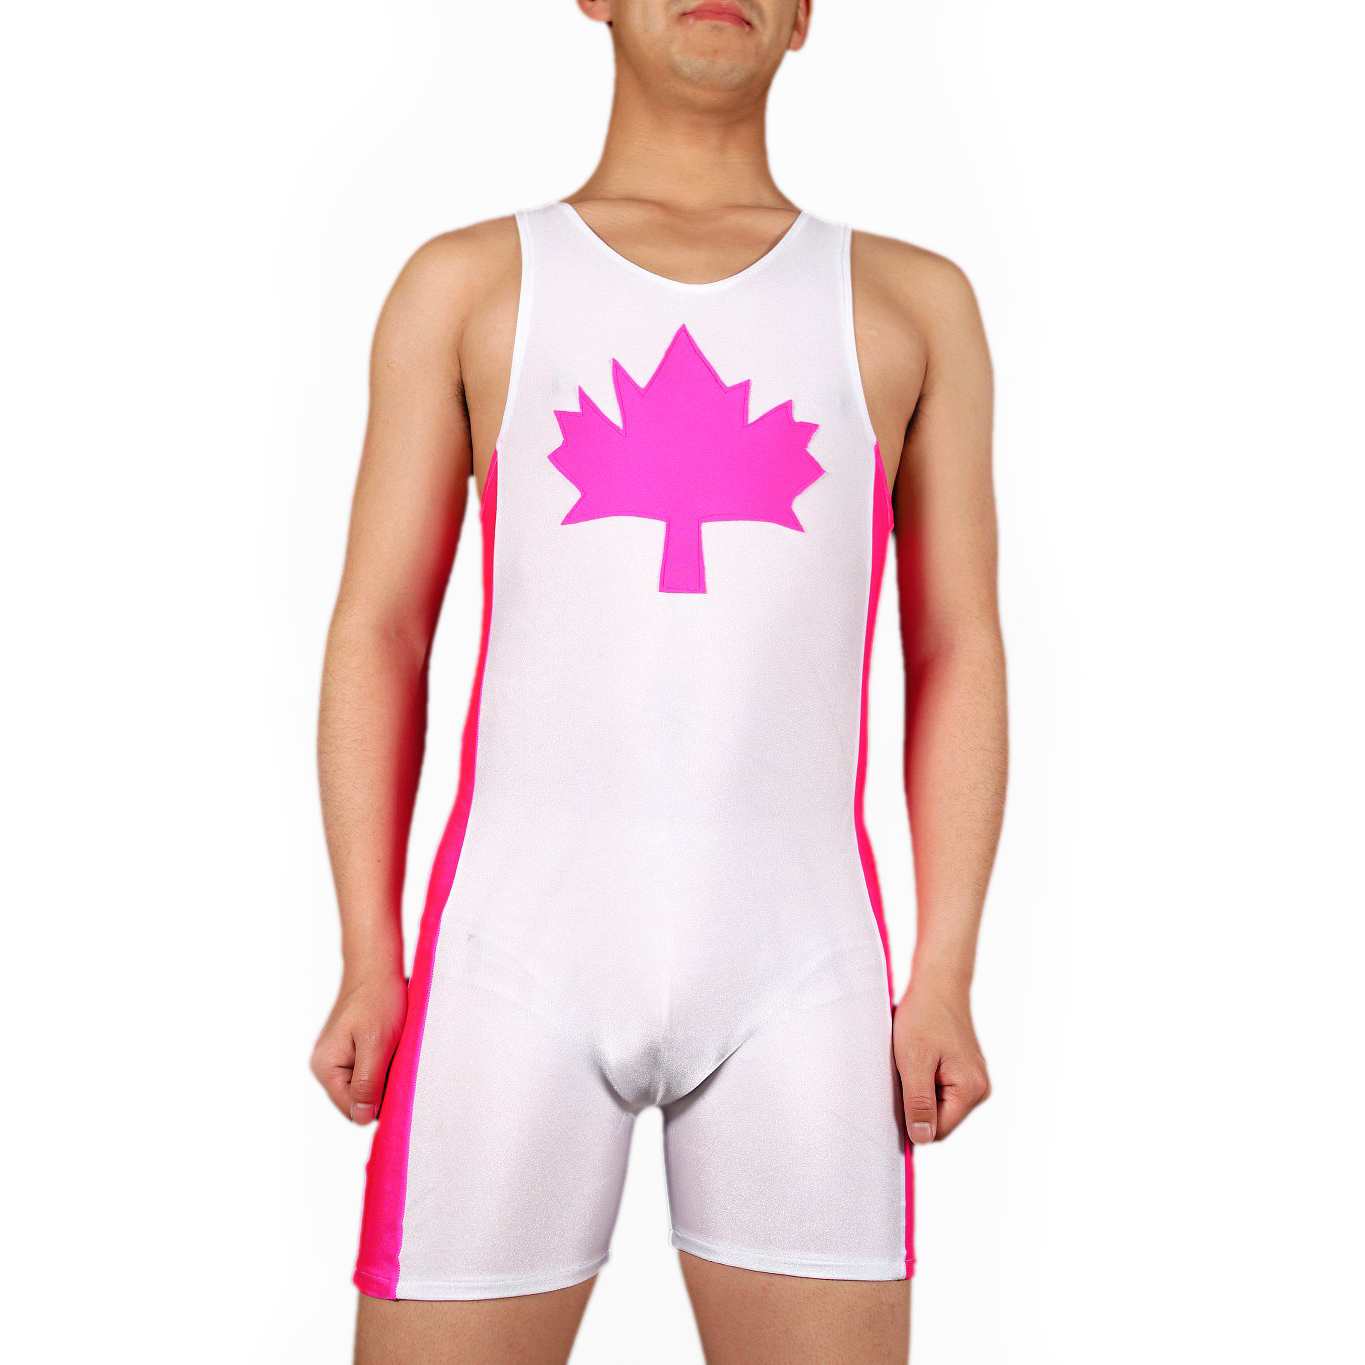 Men's Jumpsuit-styled White with Burgandy Lycra Spandex Sleevele - Click Image to Close